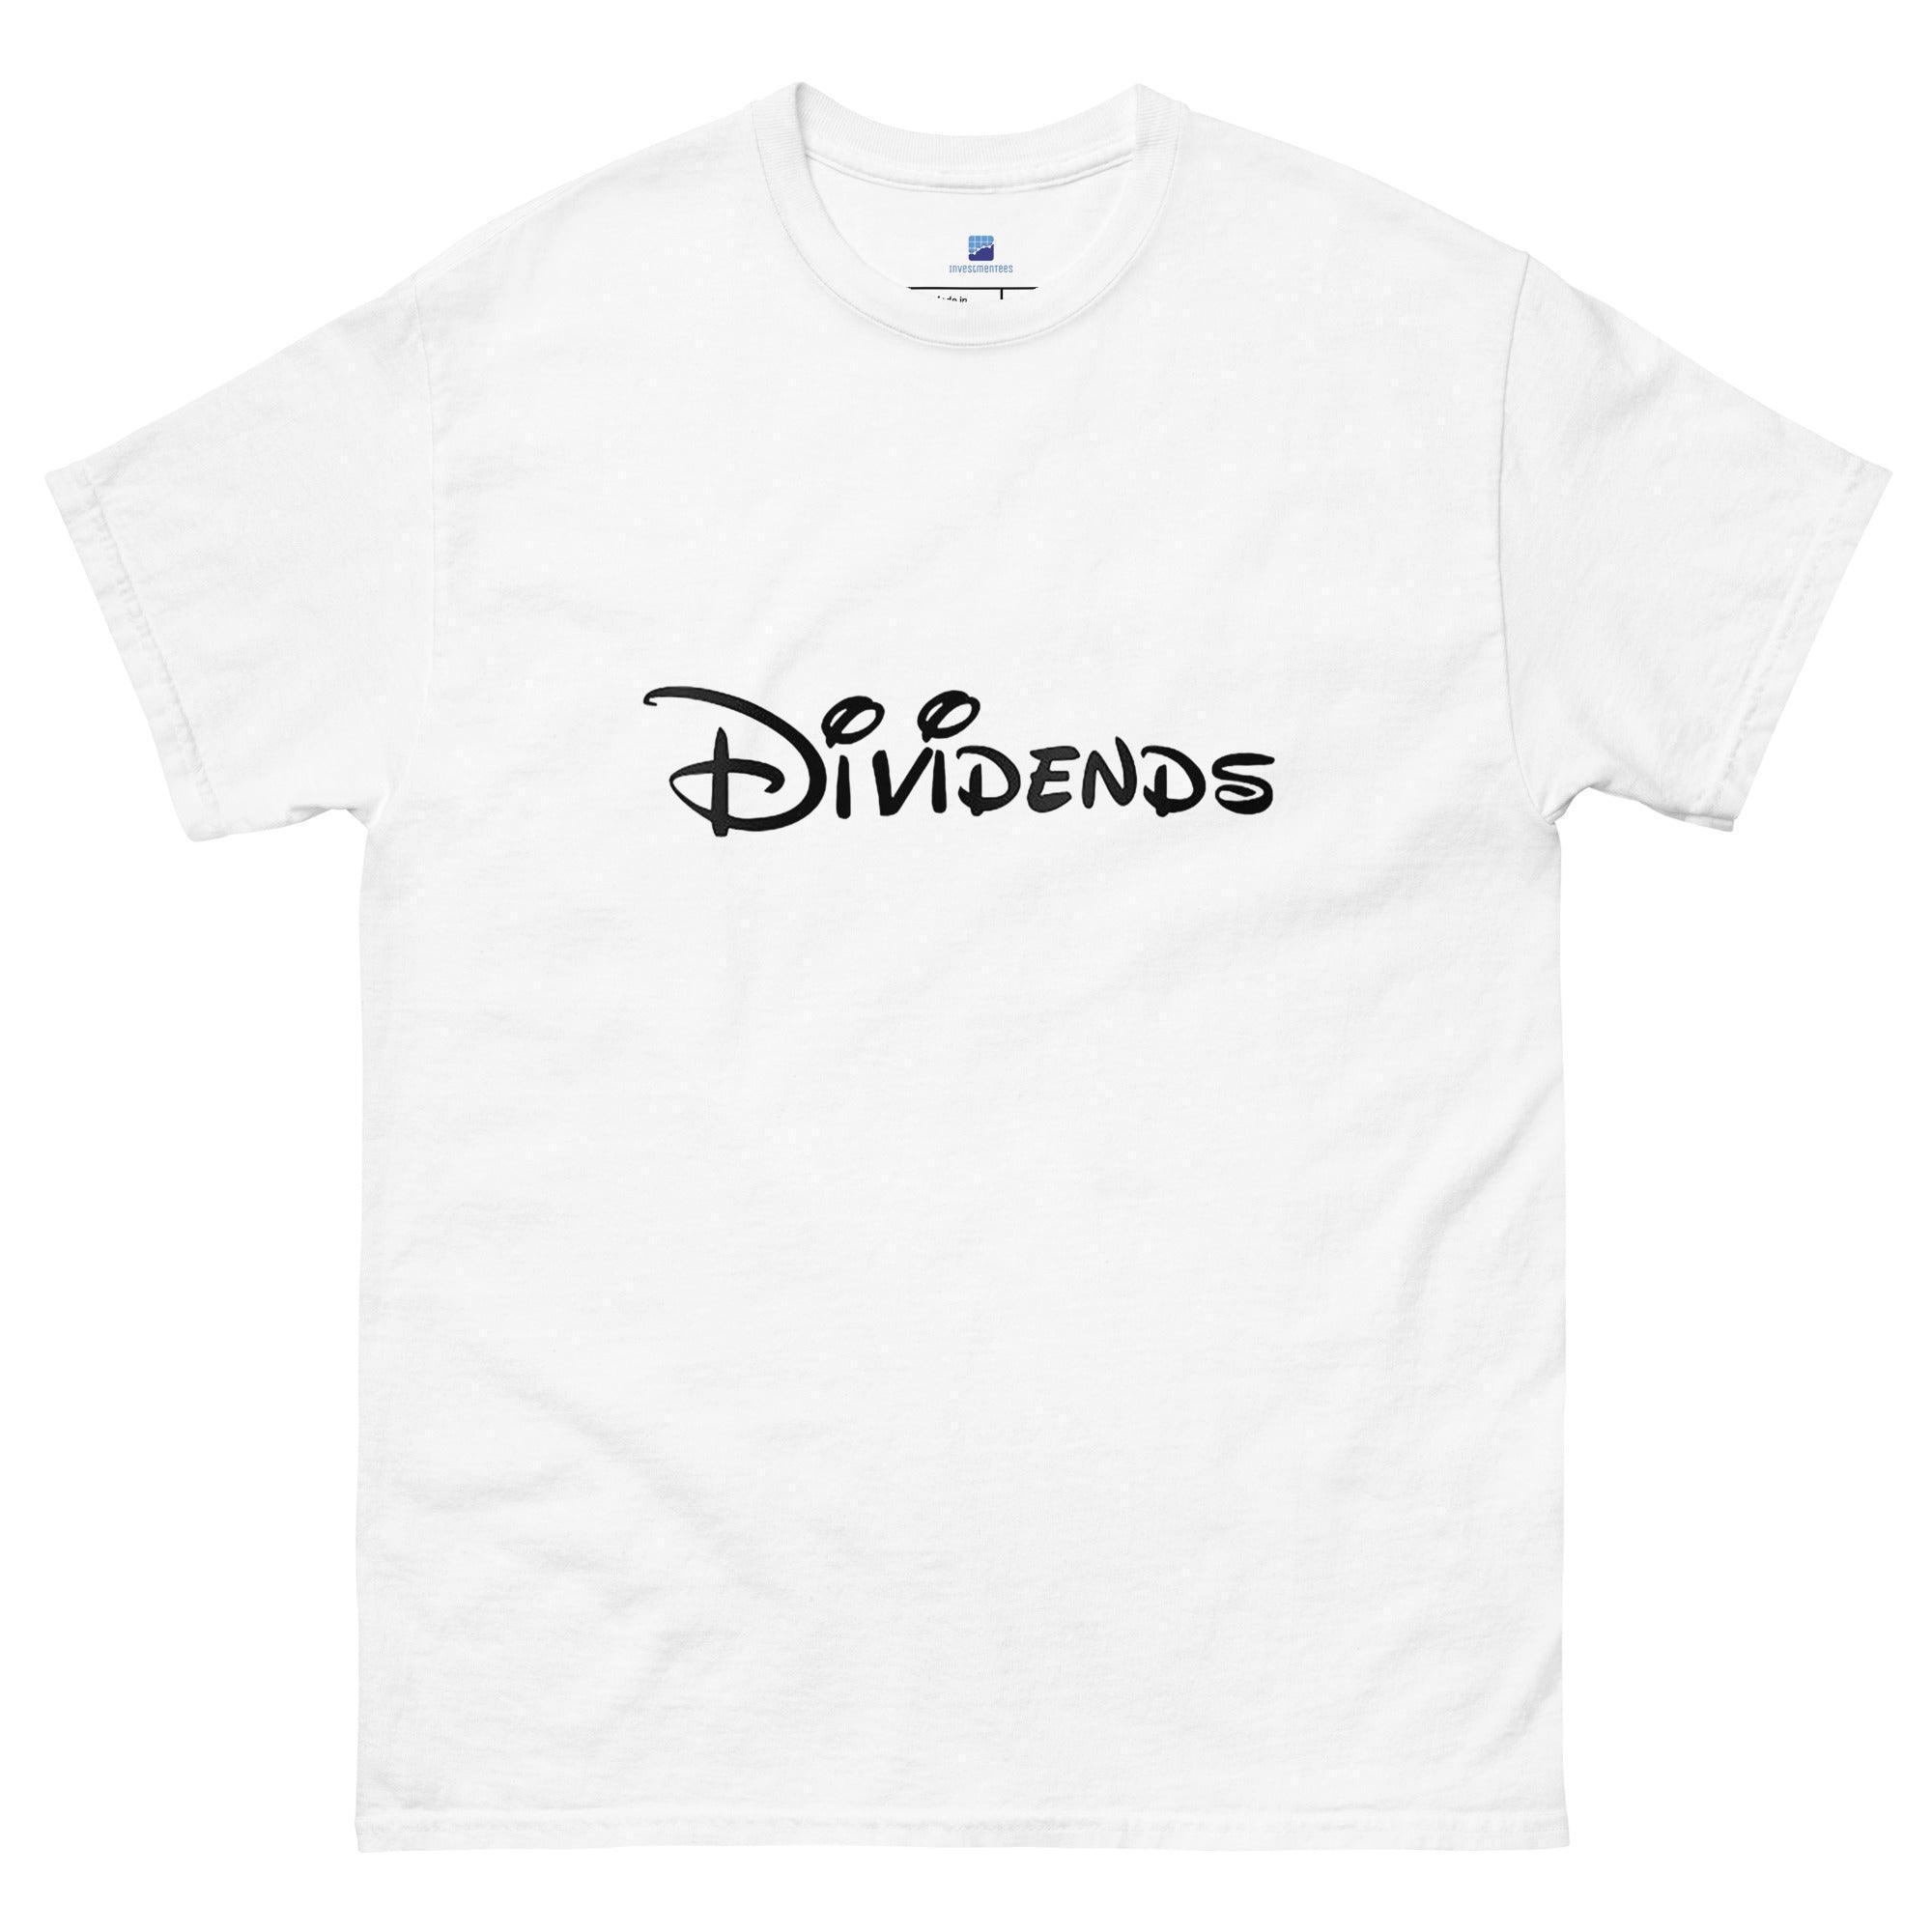 Dividends T-Shirt - InvestmenTees